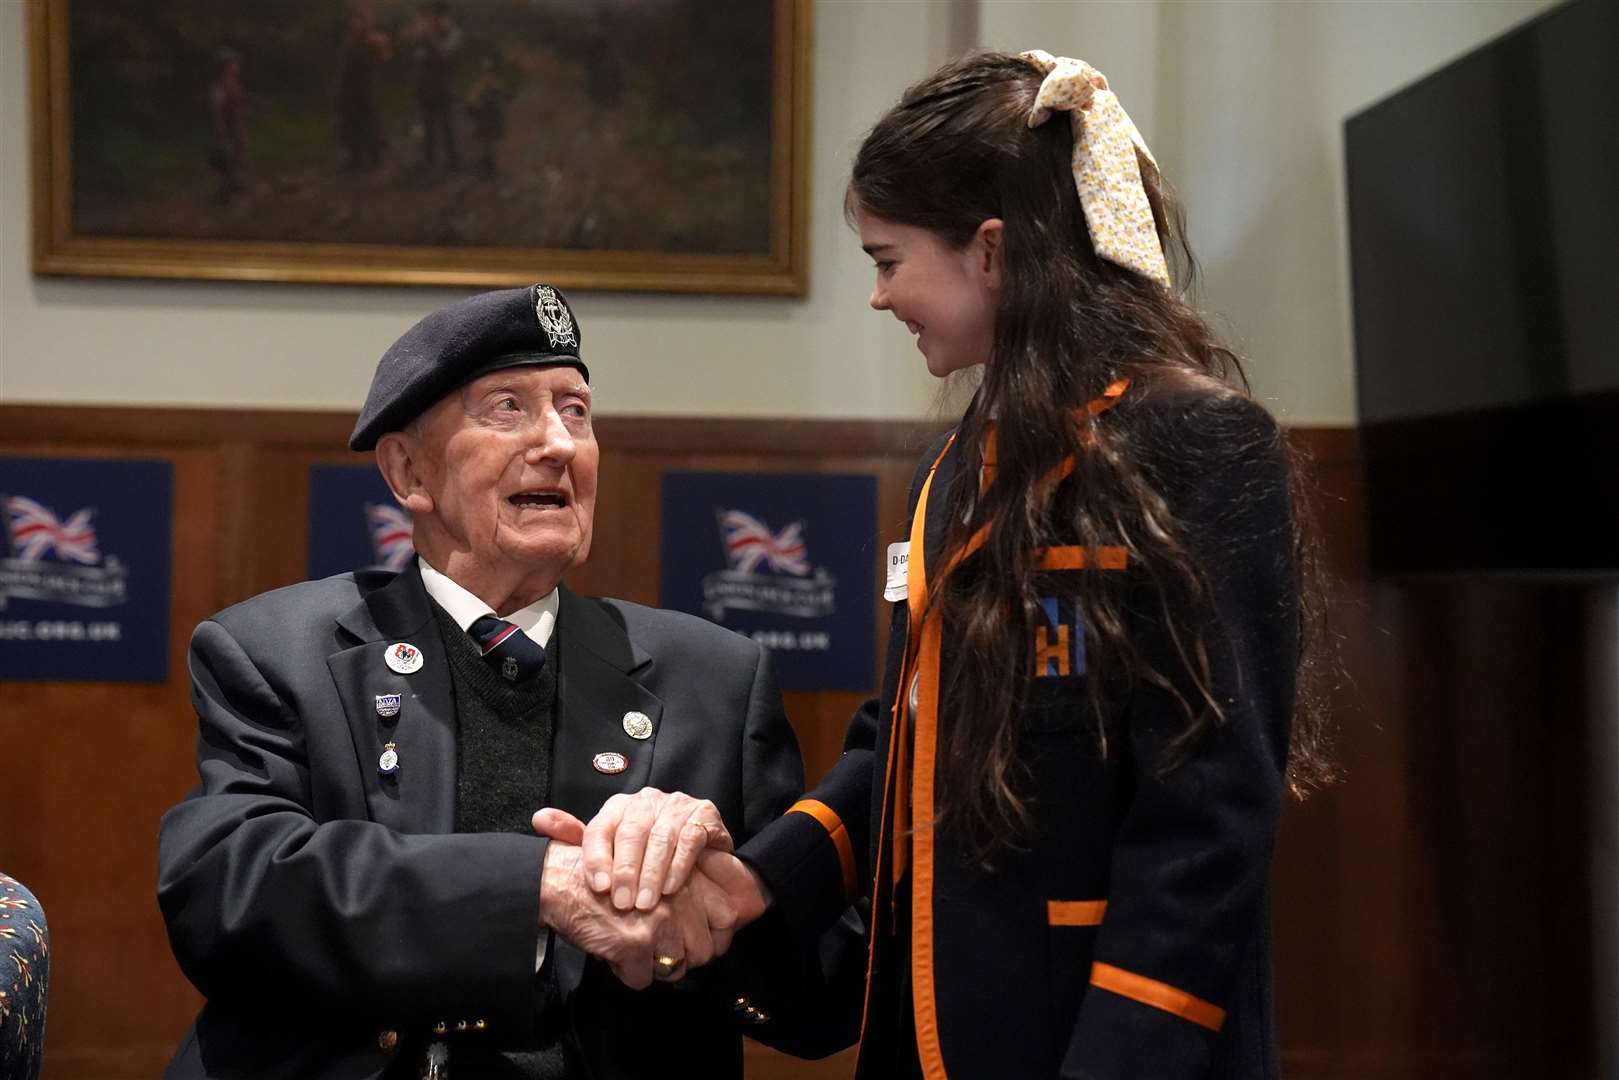 D-Day veteran and Ambassador for the British Normandy Memorial Stan Ford, 98, who served with the Royal Navy, meeting a pupil from Norfolk House School (Gareth Fuller/PA)